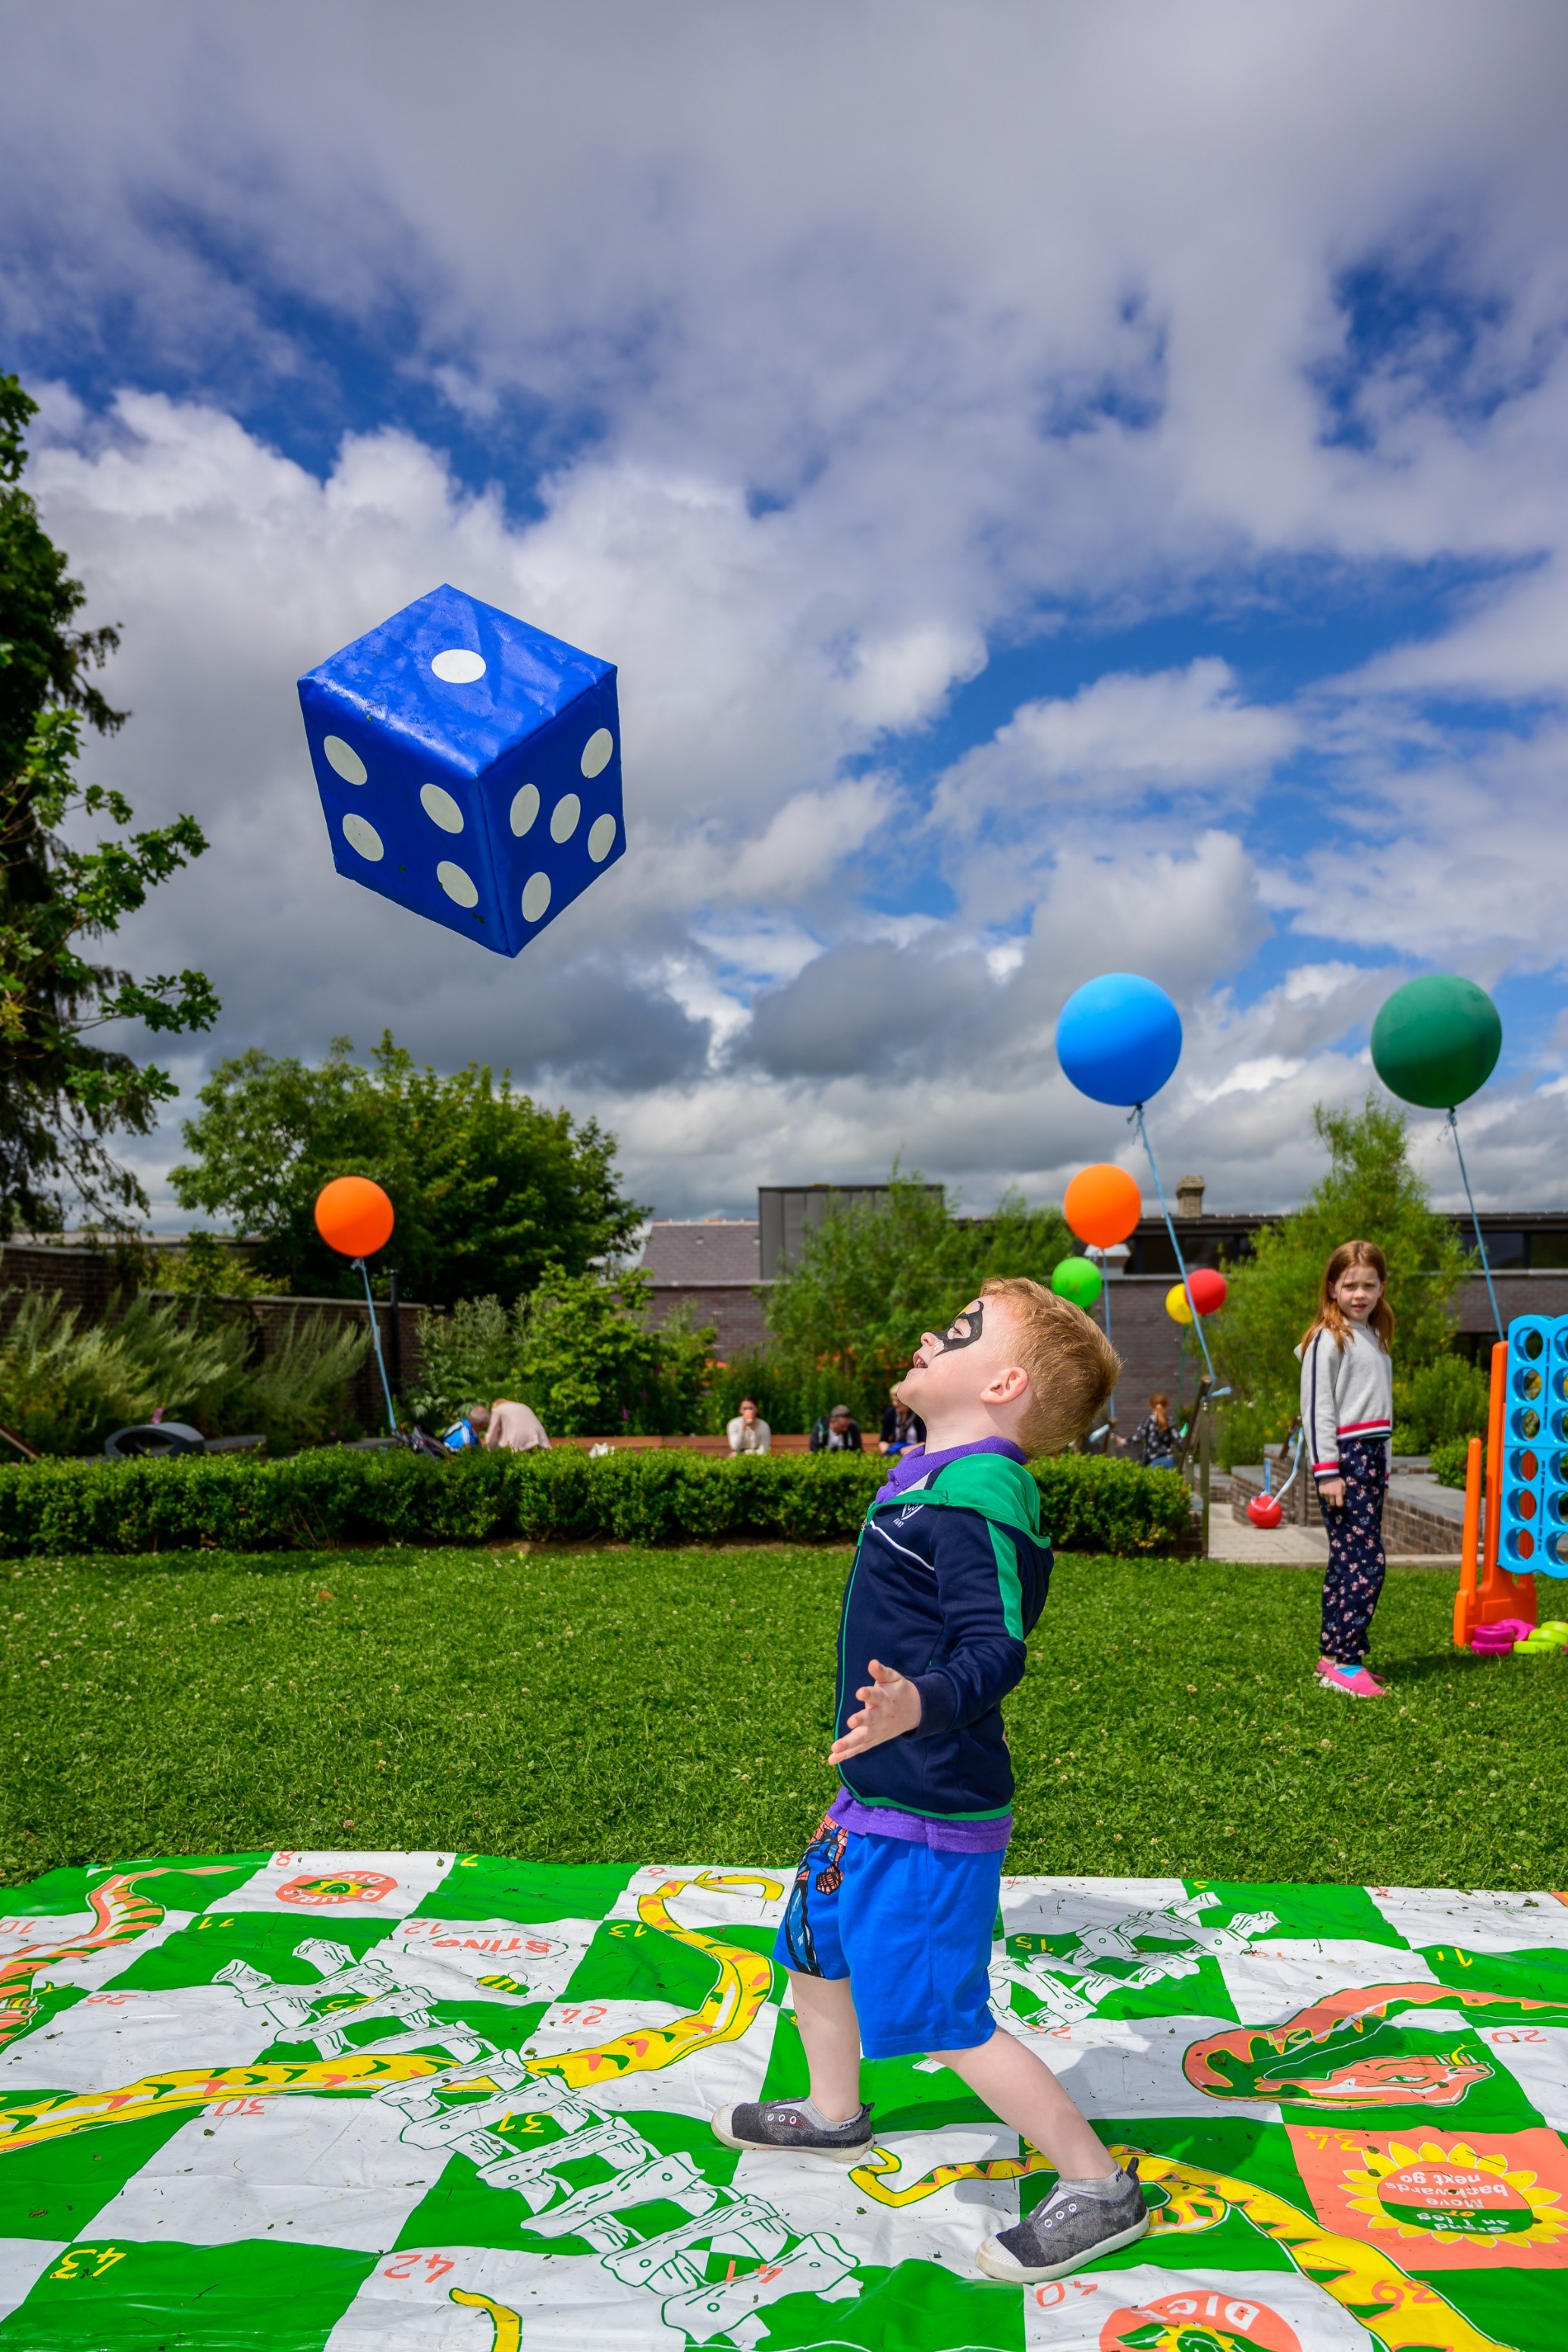 Ryan Fitzpatrick throws the dice at the Round Tower Family Fun day in Clondalkin.